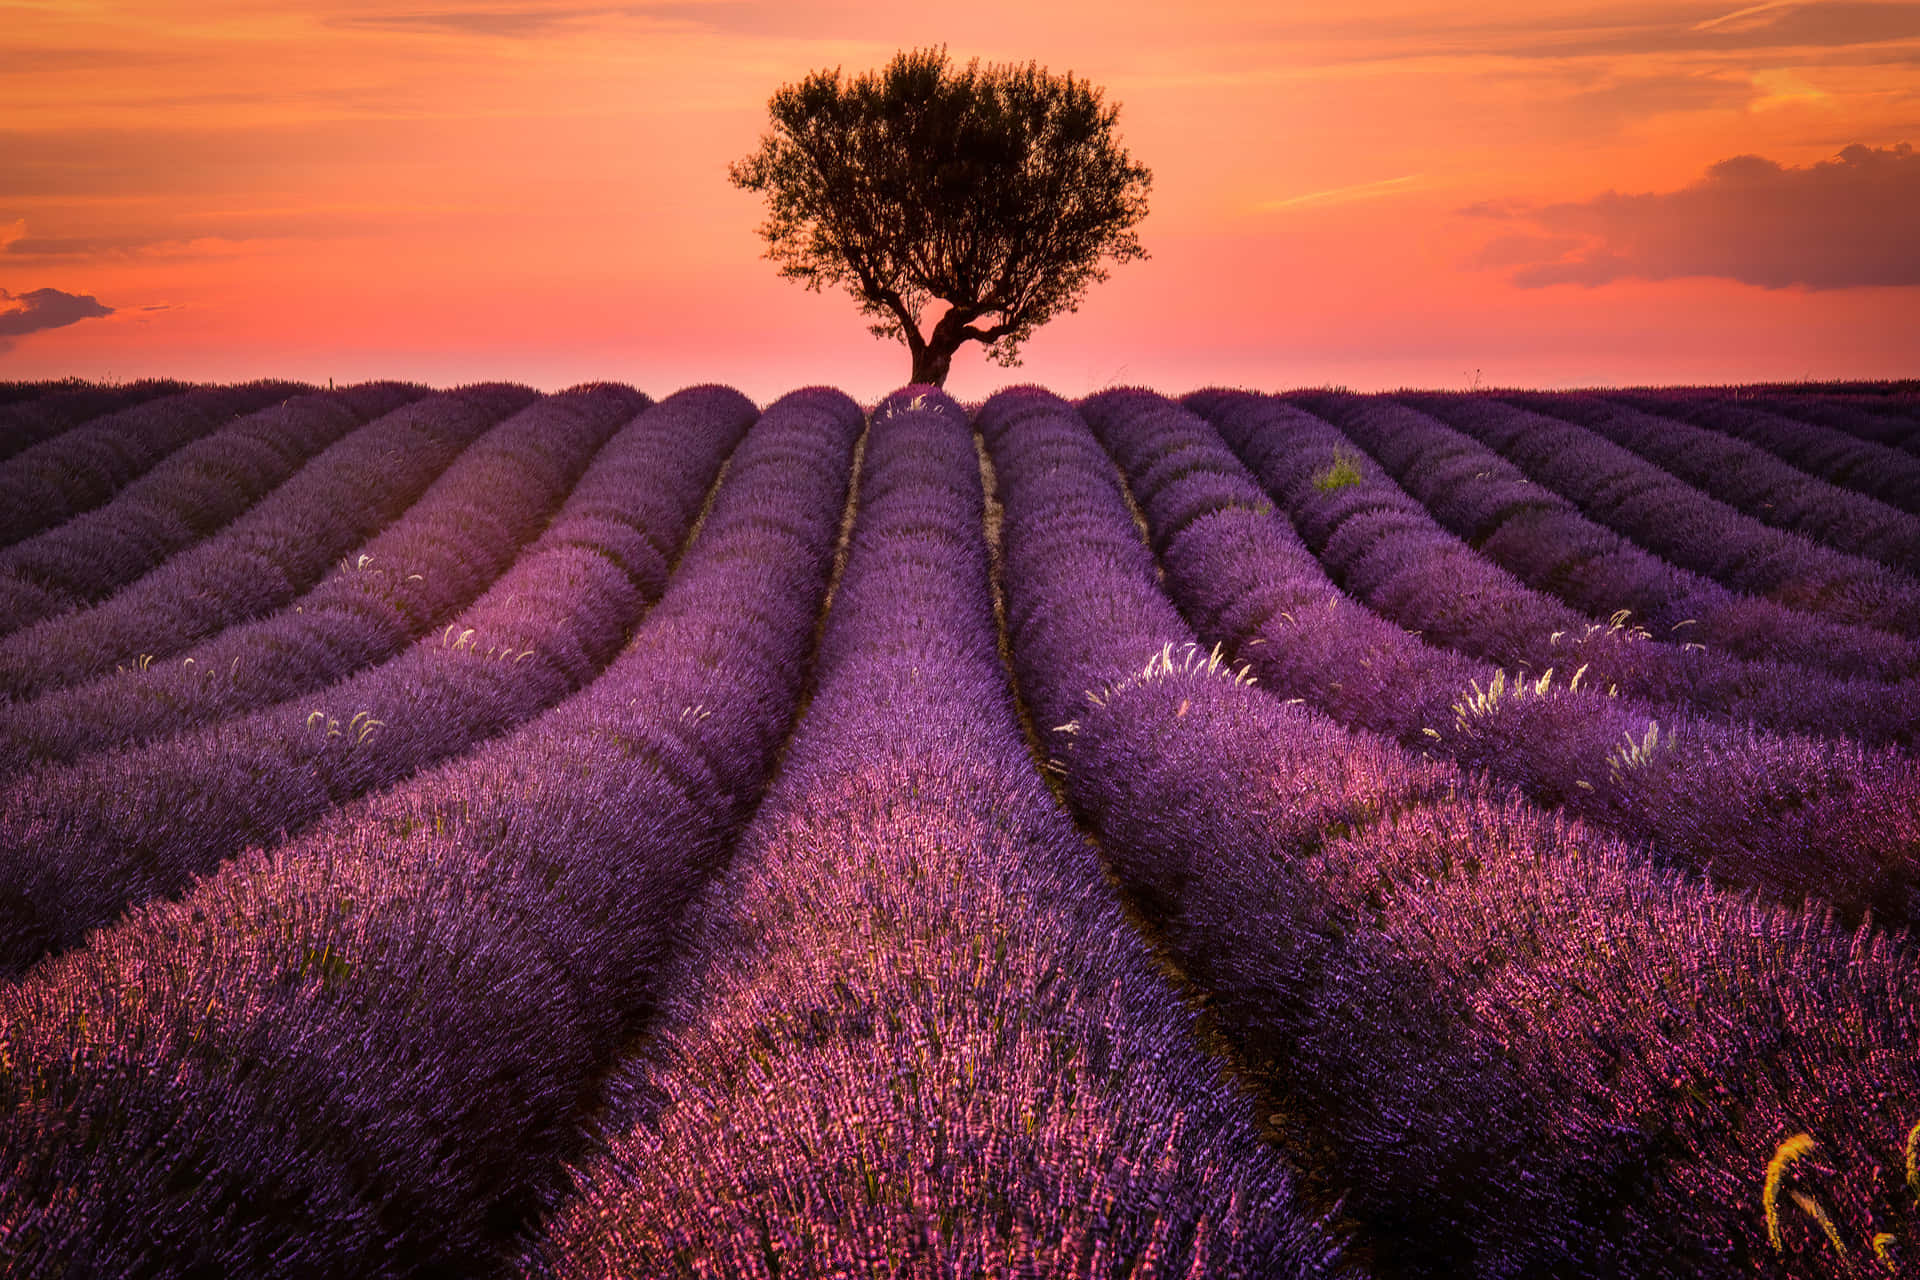 Image  "A tranquil lavender field on a beautiful summer day."